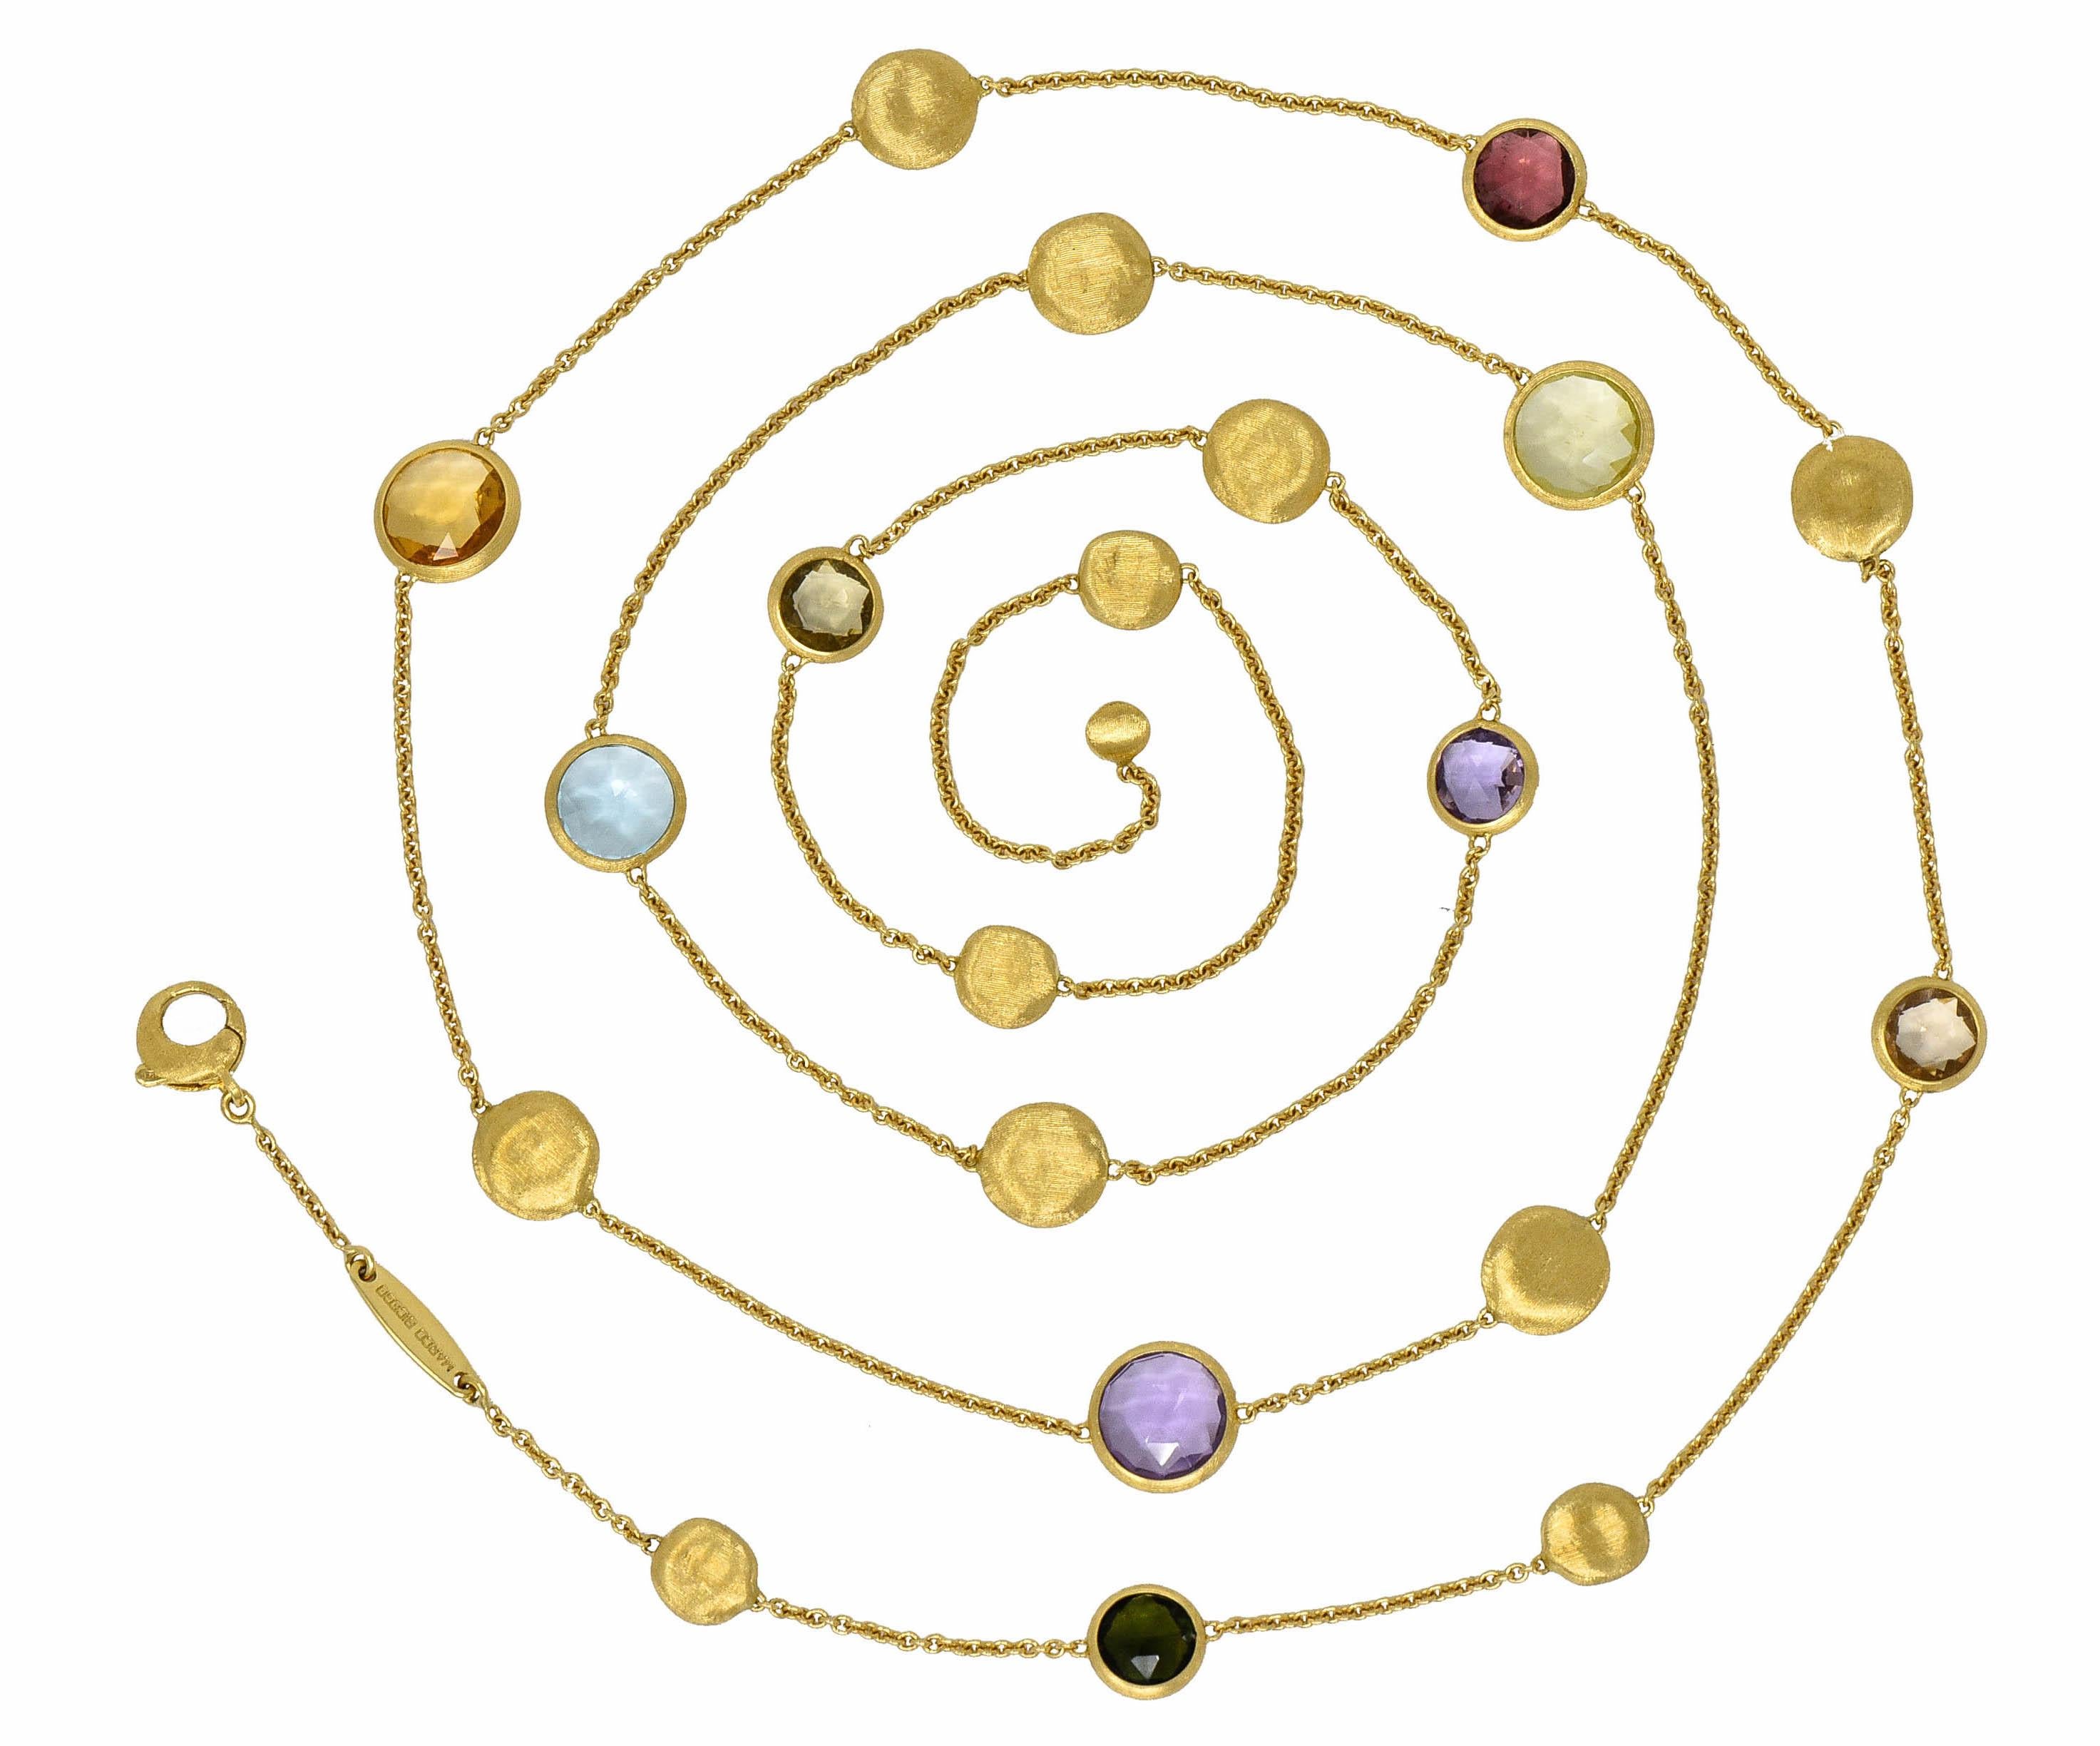 Necklace is designed with brushed gold oval stations alternating with gemstones, bezel set in brushed gold surrounds

Featuring round cut and faceted tourmaline, topaz, peridot, beryl, and others

Completed by cable chain terminating as a stylized